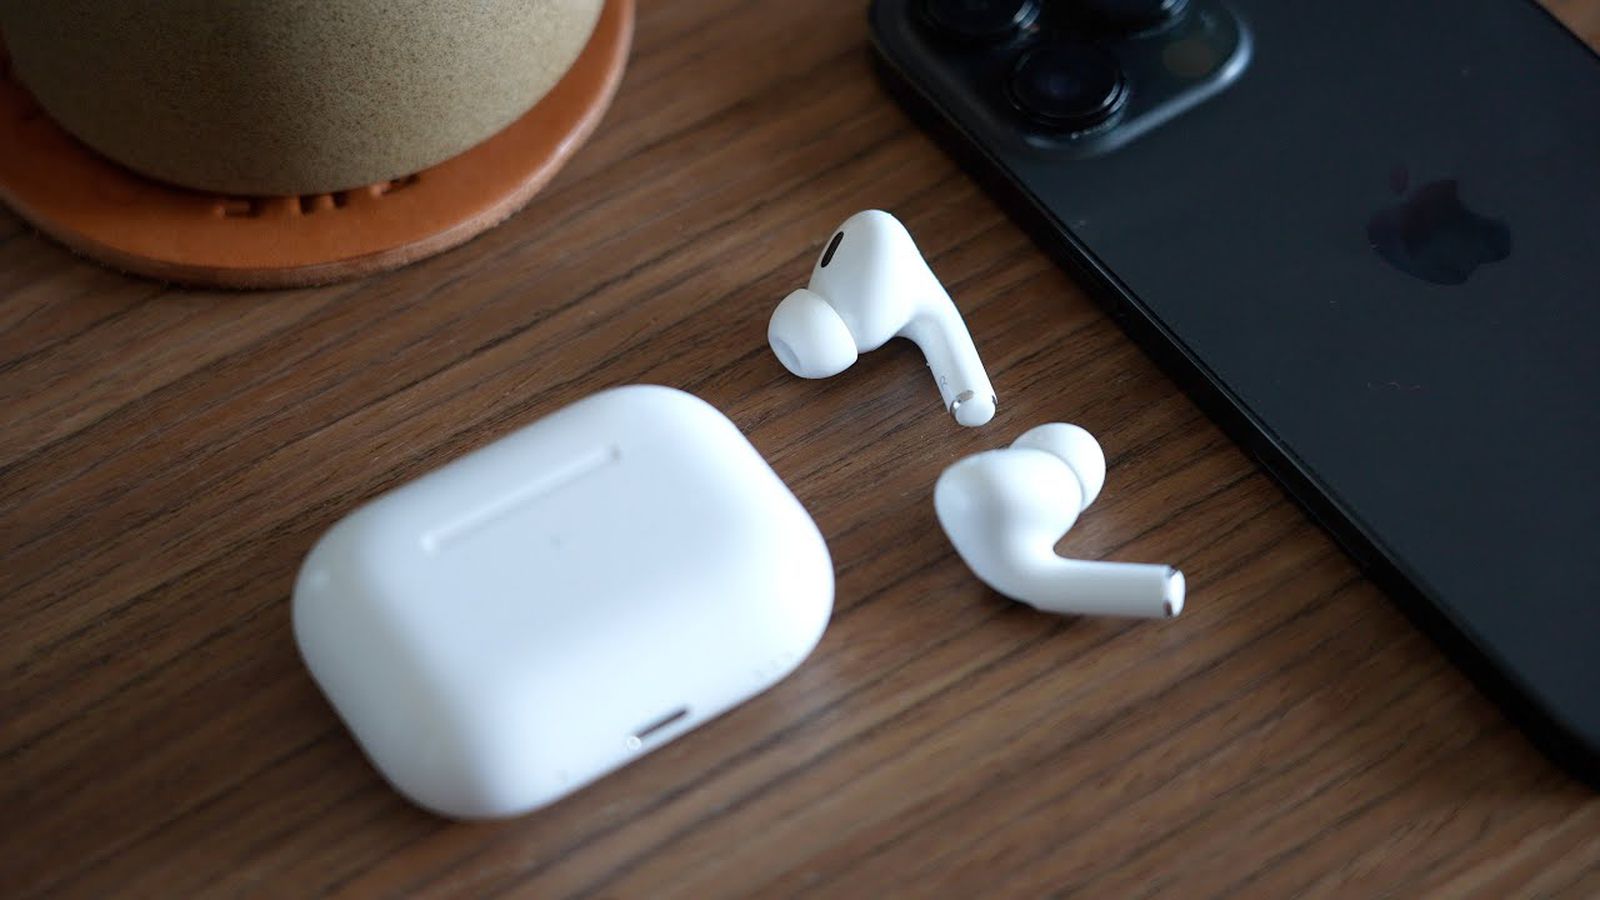 Video: 10 Days With the AirPods Pro 2